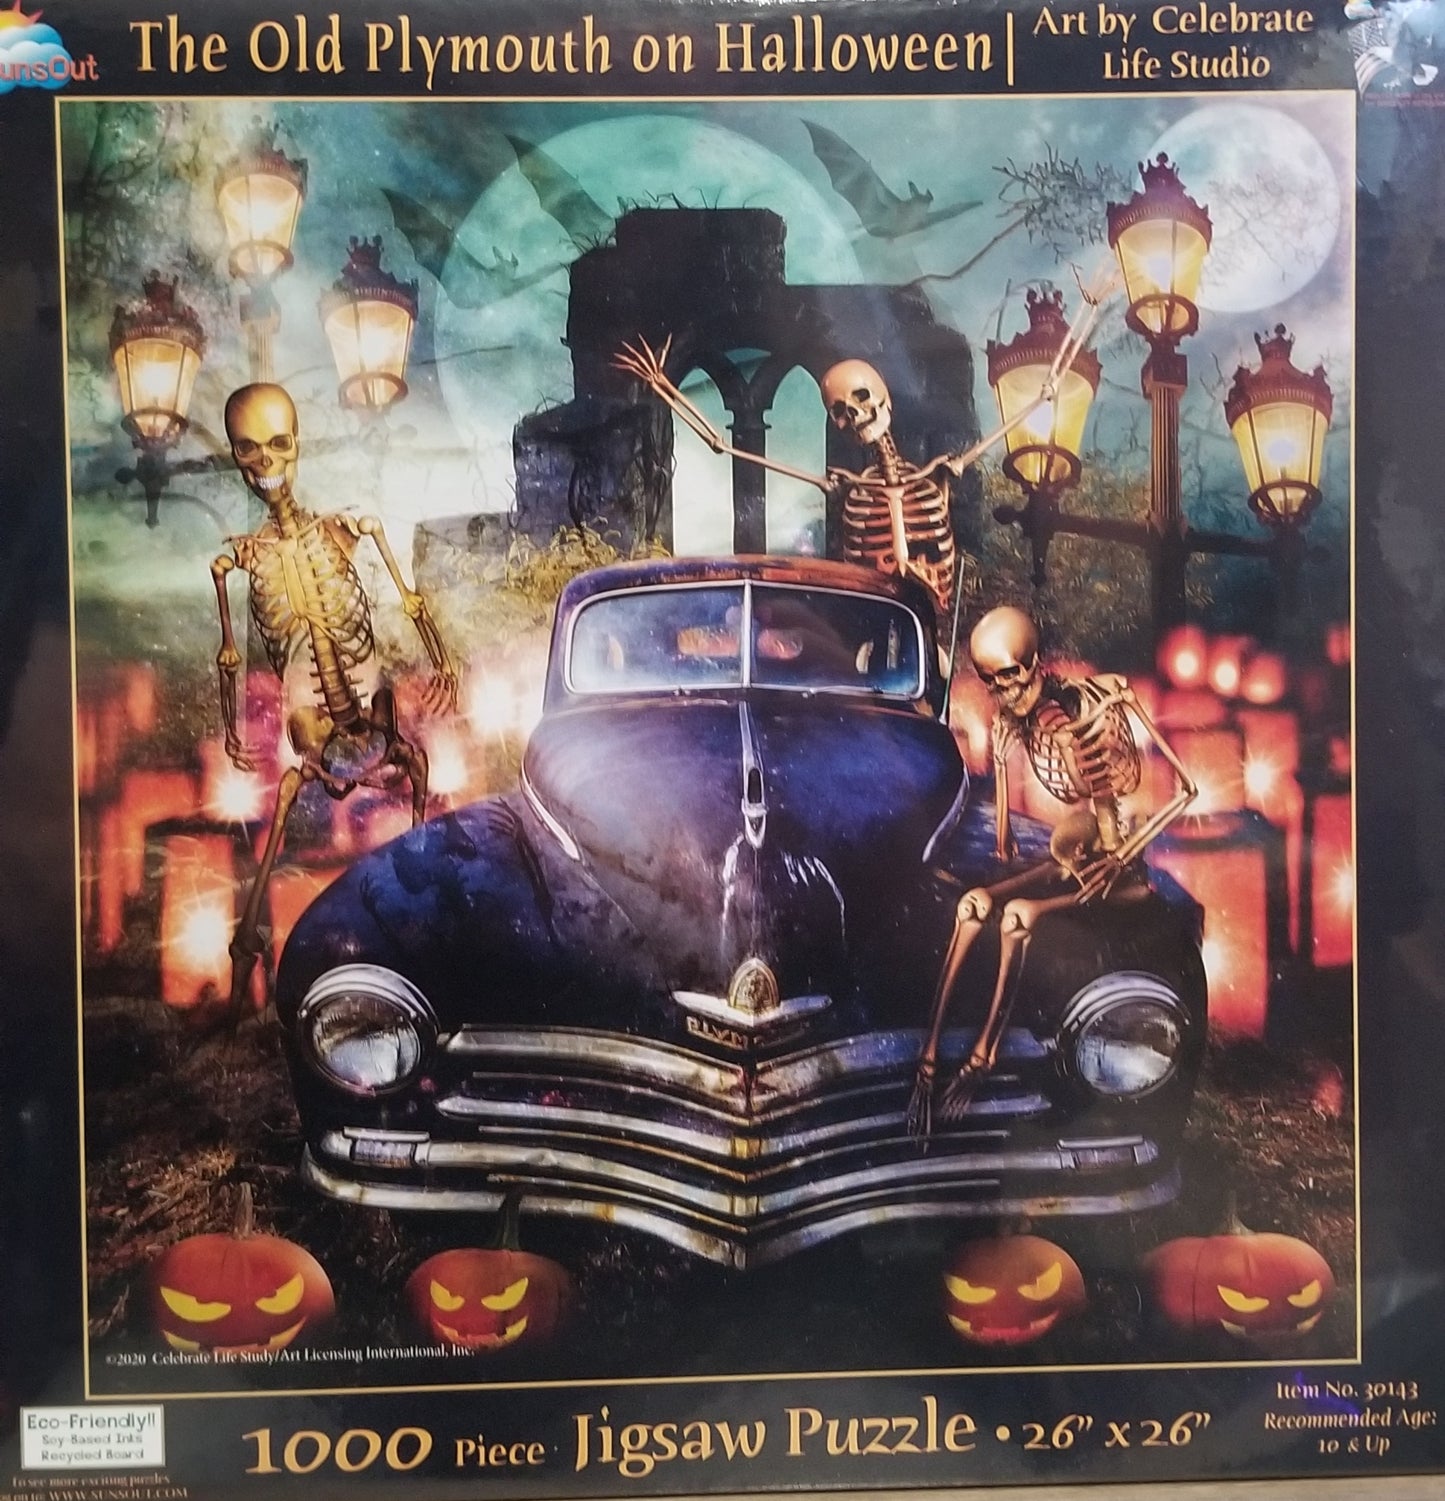 The Old Plymouth on Halloween af ​​Celebrate art Studio, 1000 stykke puslespil